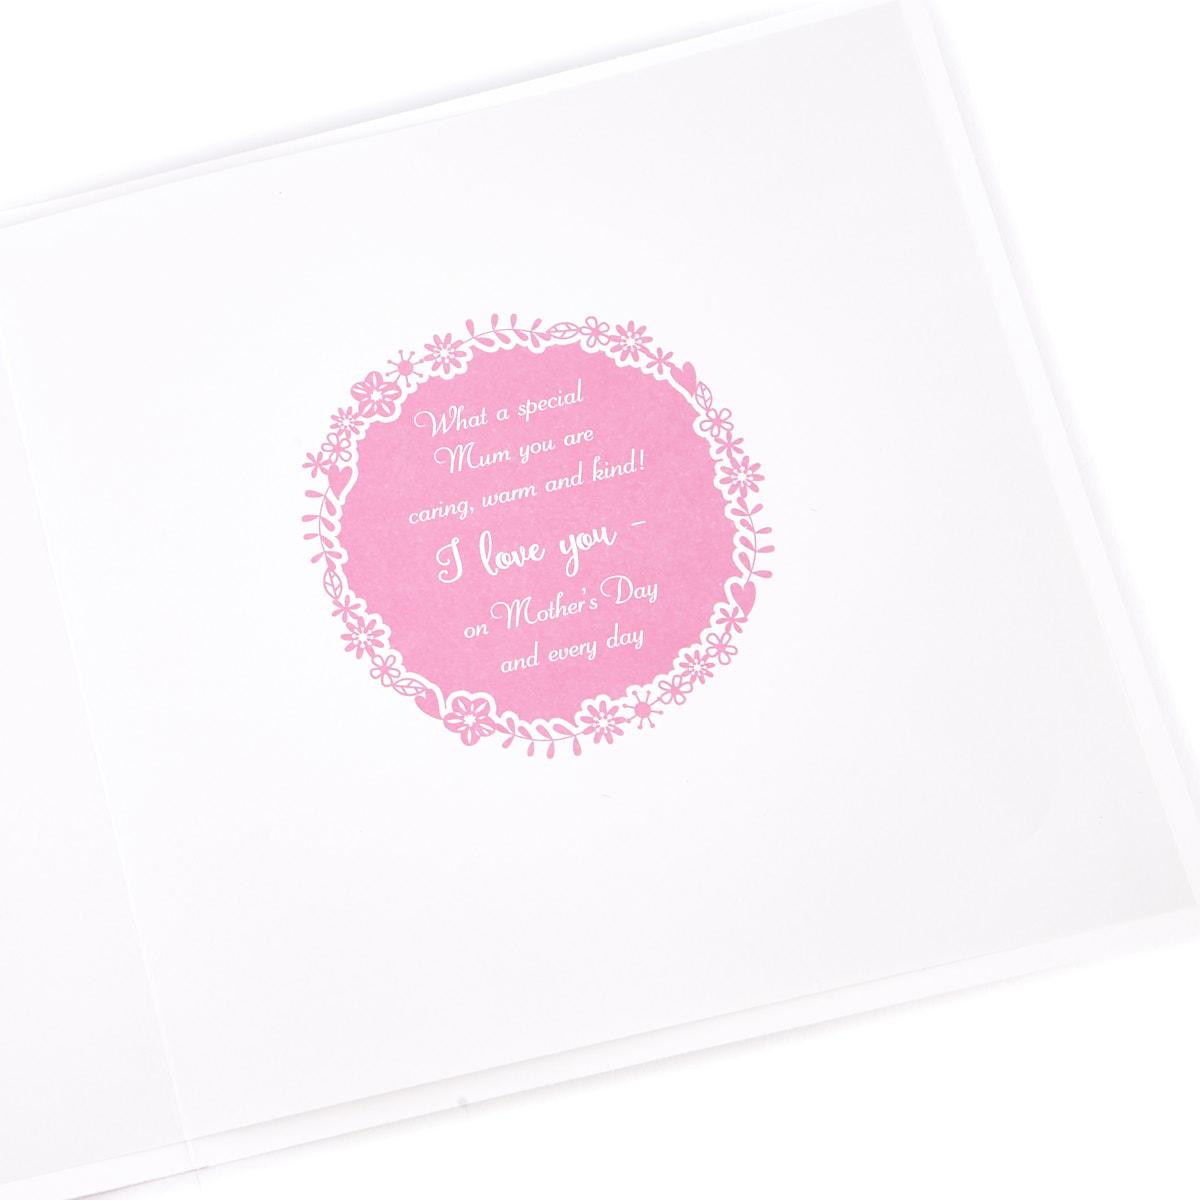 Exquisite Collection Mother's Day Card - Wonderful Mum, Pink & White